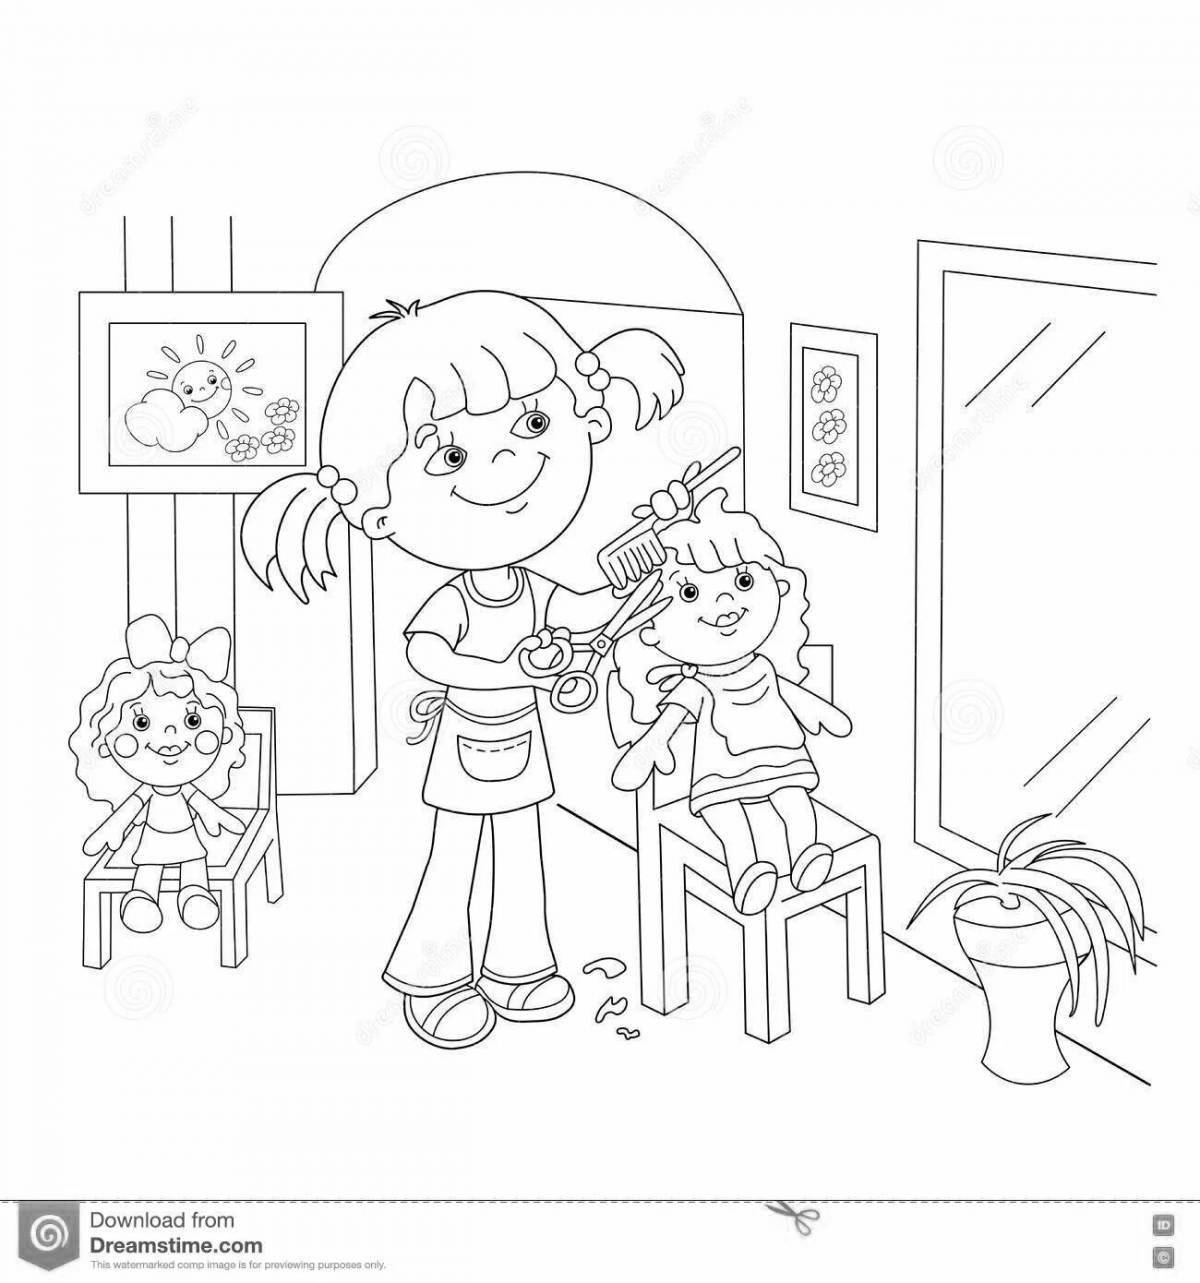 Hairdresser coloring pages for kids